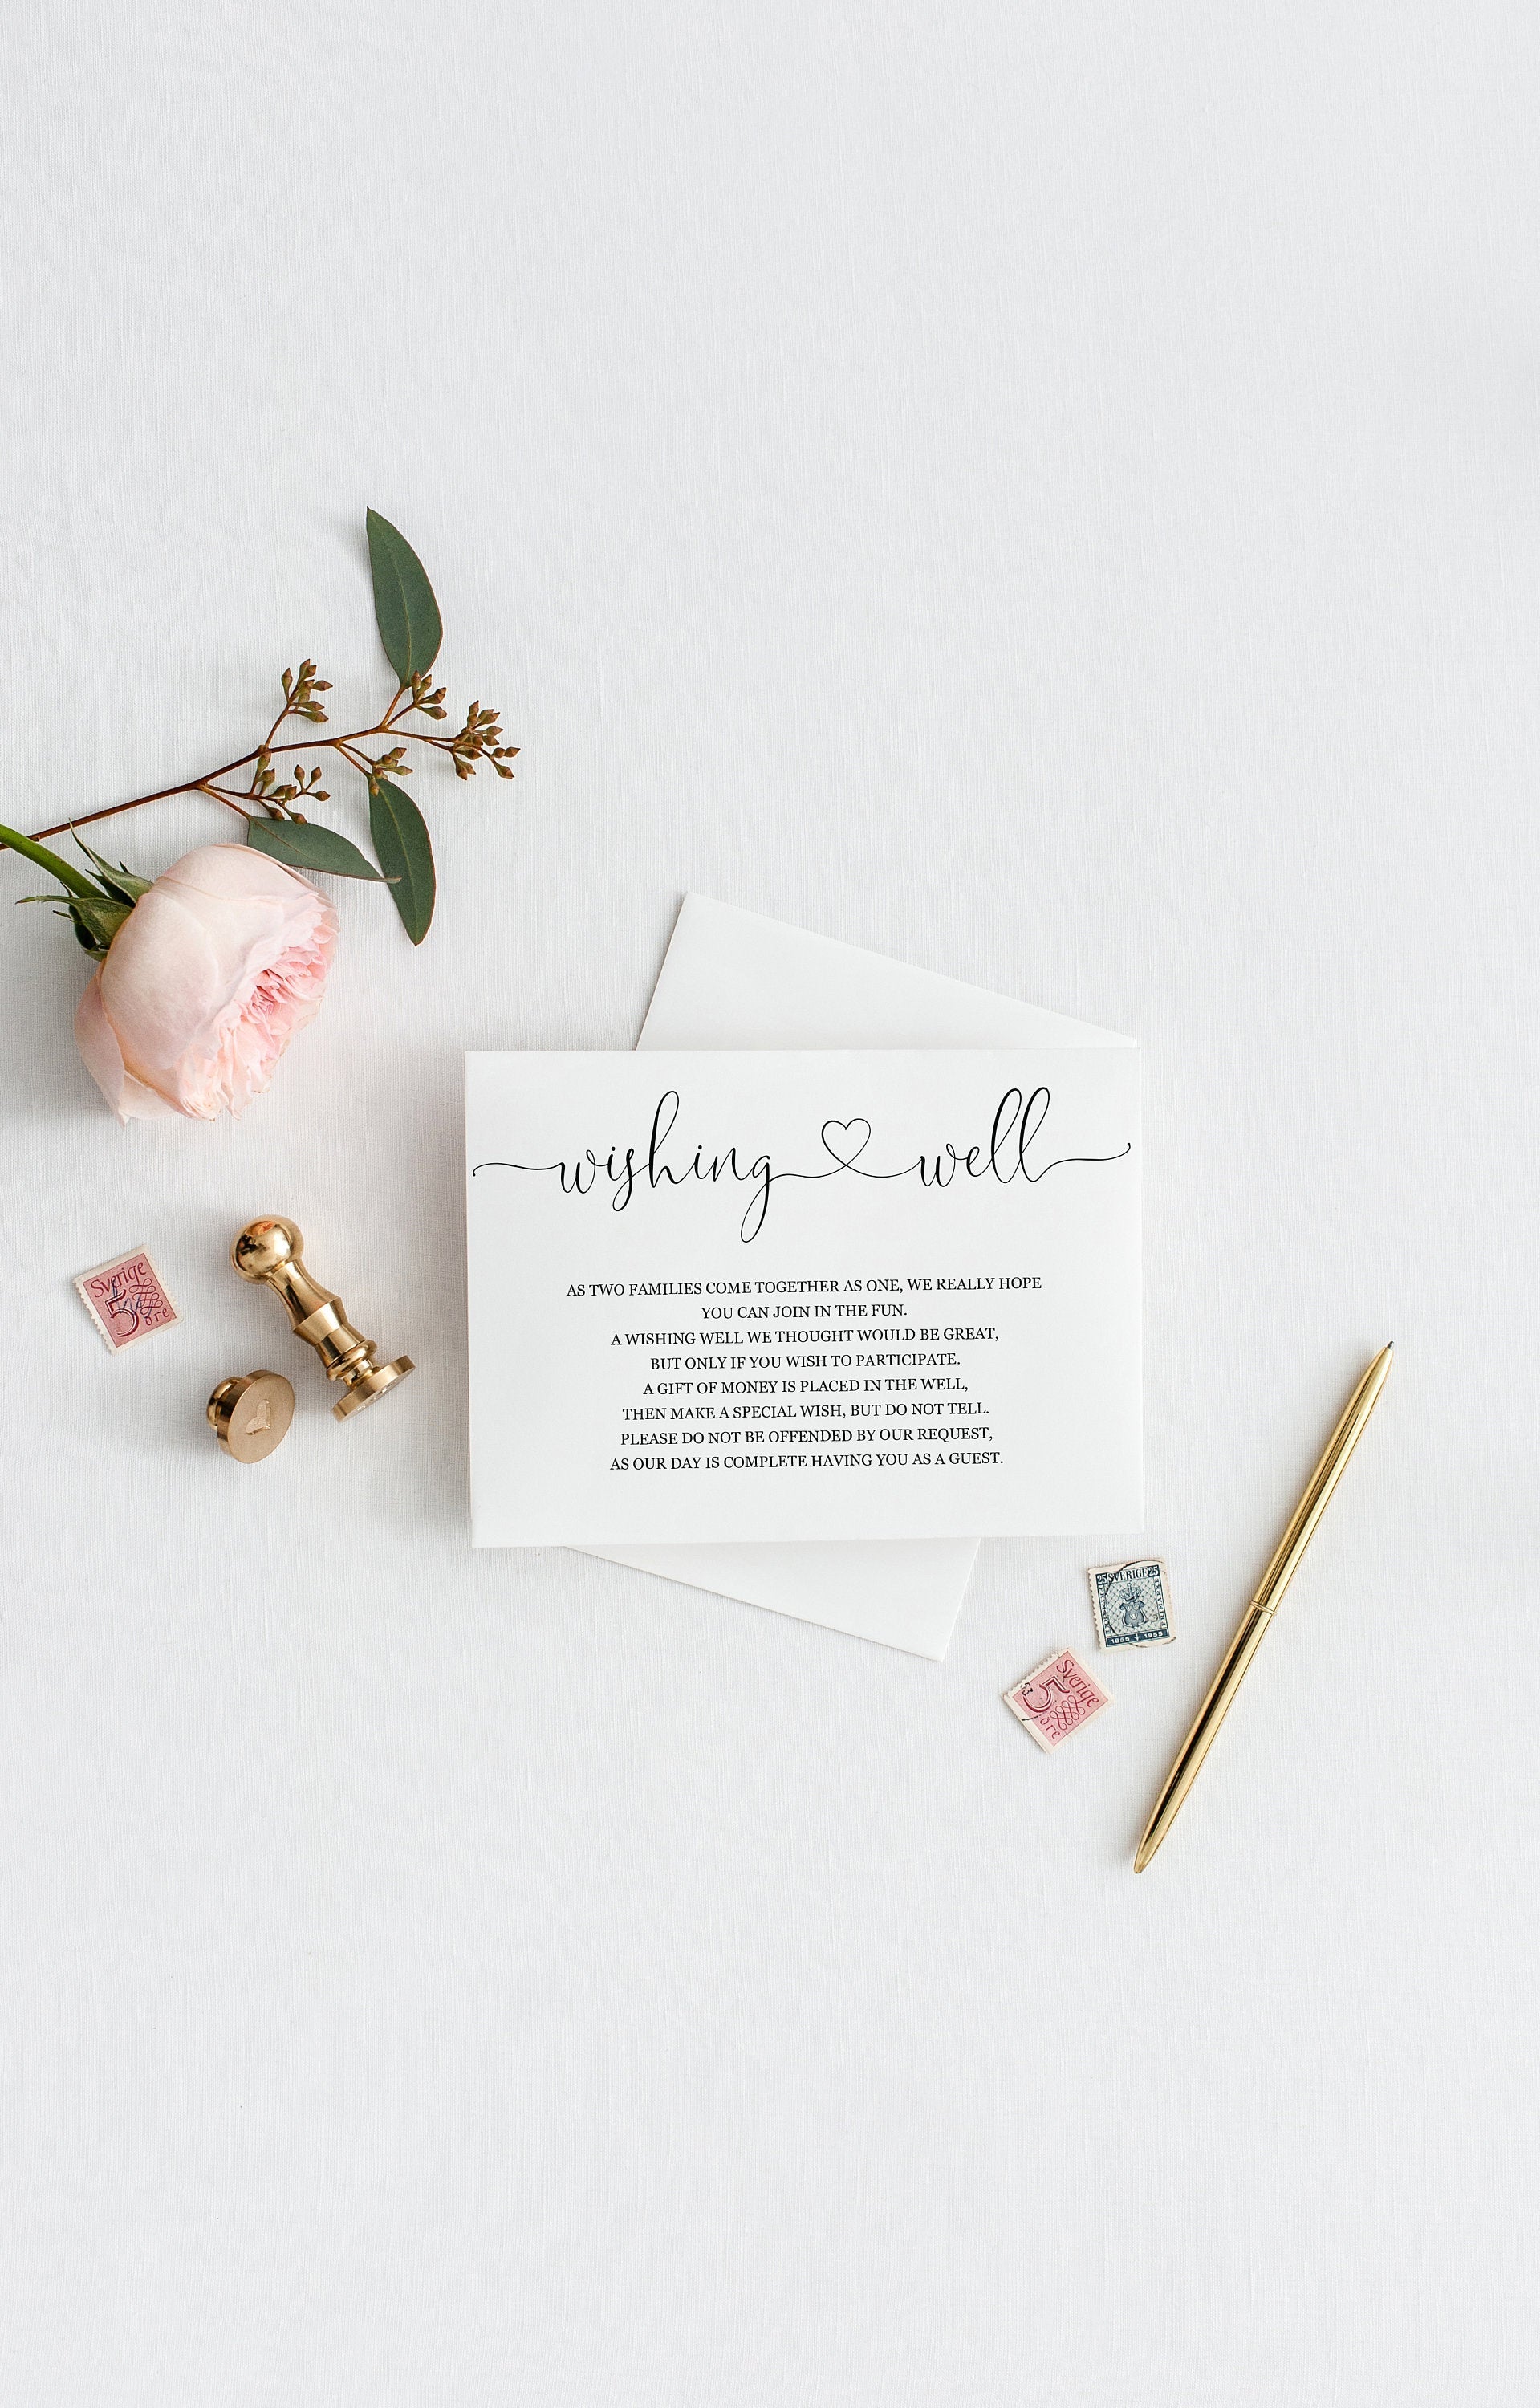 Simple Wedding Wishing Well Card Template,Instant Download, Editable Wishing, Wishing well Cards Insert, Calligraphy,Rustic,Heart  - Heather TAGS | TY | INSERTS SAVVY PAPER CO